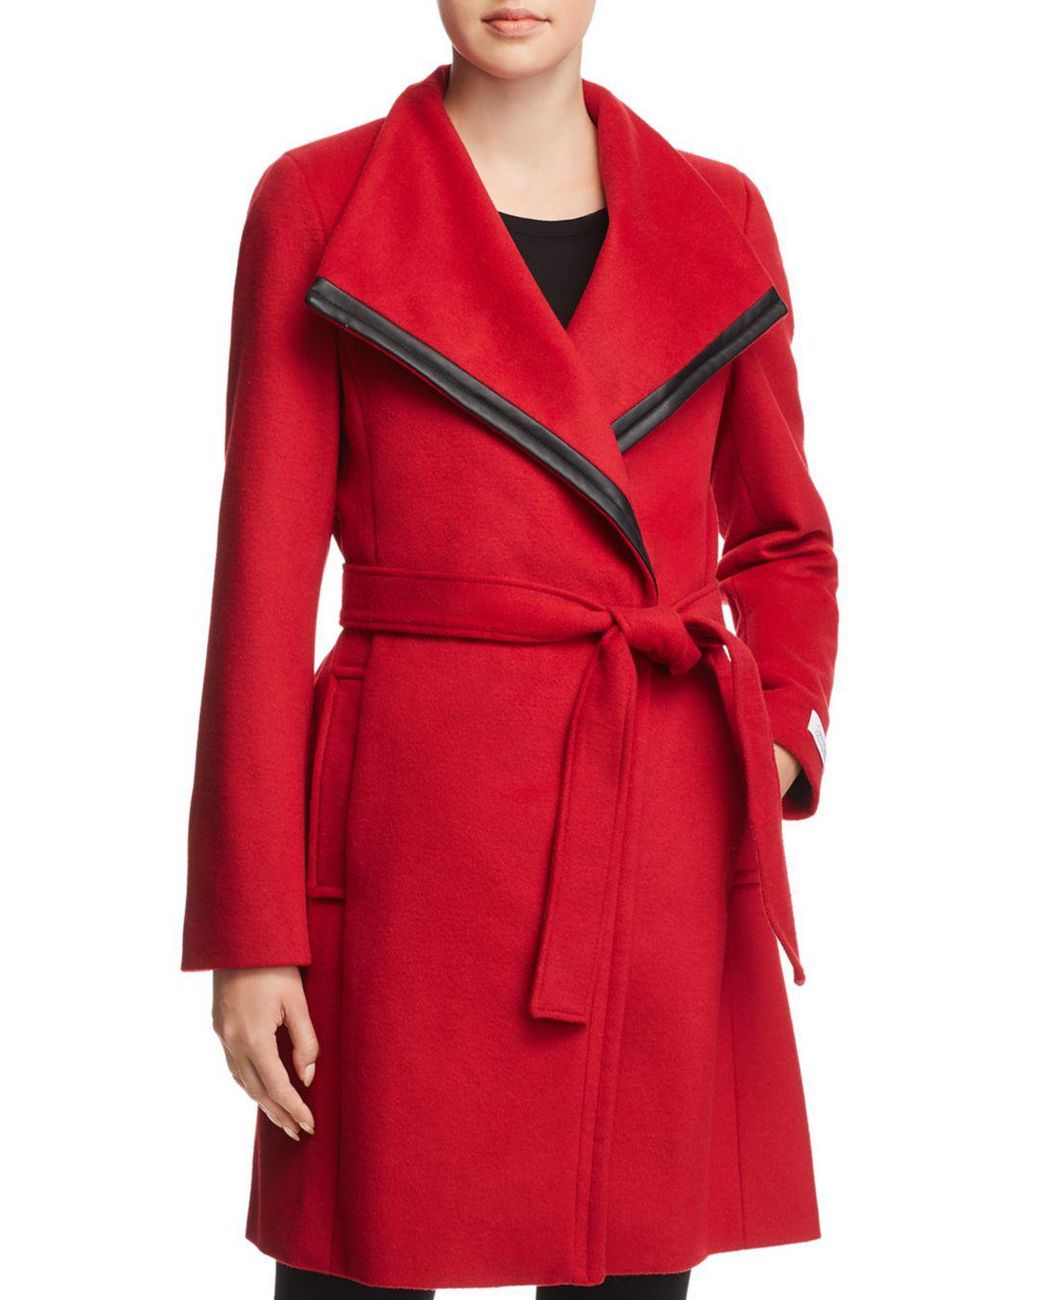 Lyst - Calvin Klein Belted Asymmetric Front Coat in Red